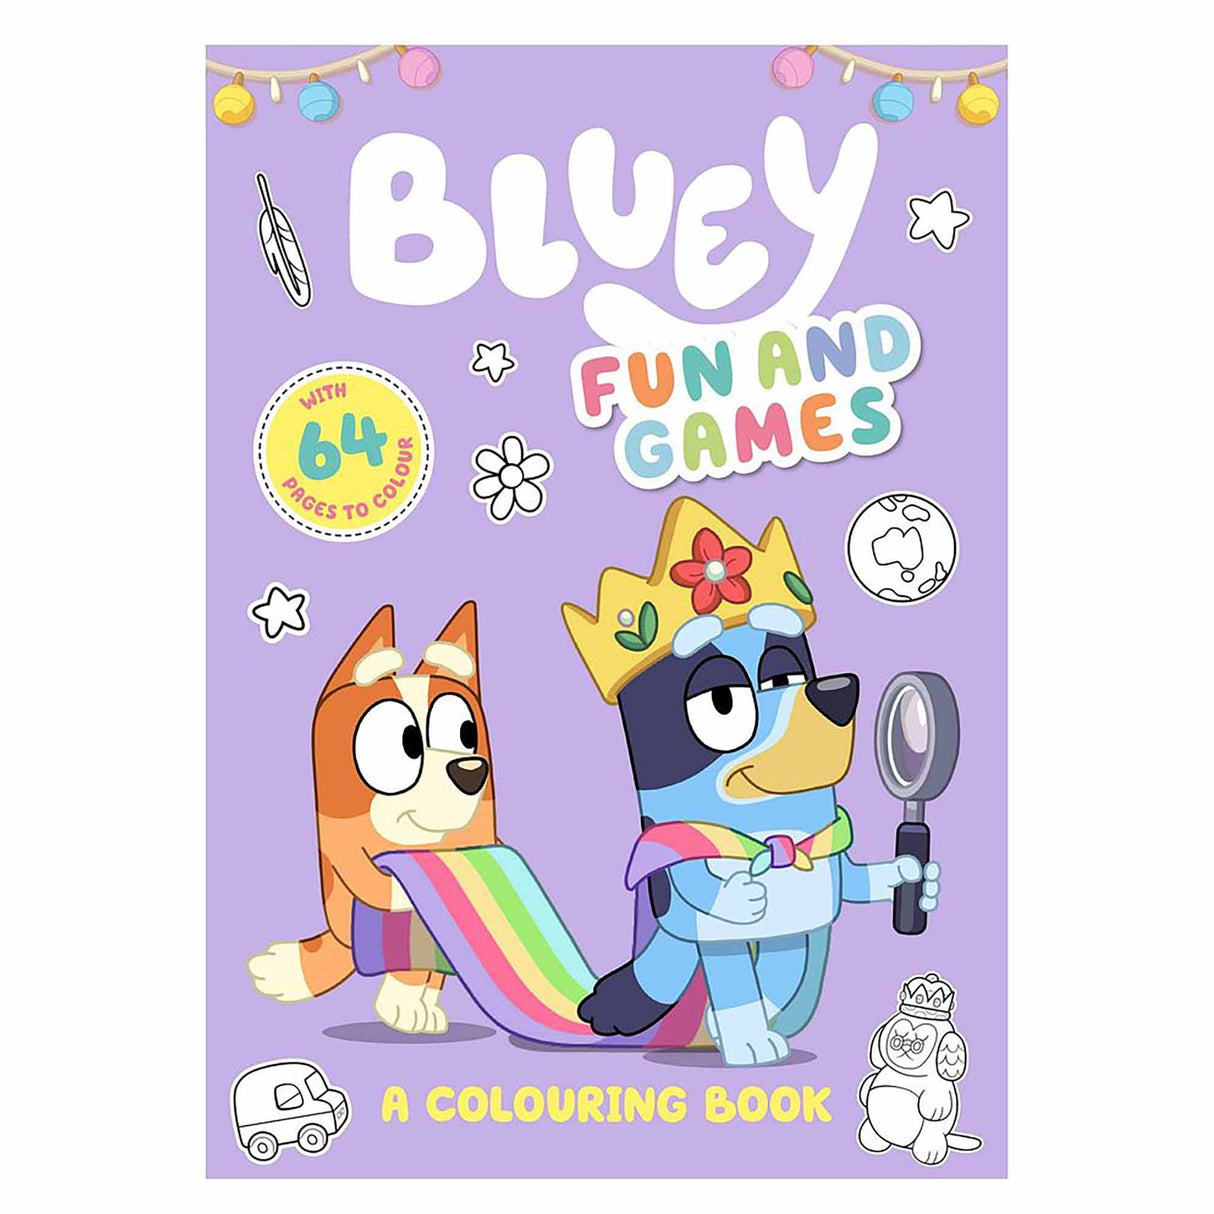 Penguin Bluey: Fun and Games Colouring Book by Penguin